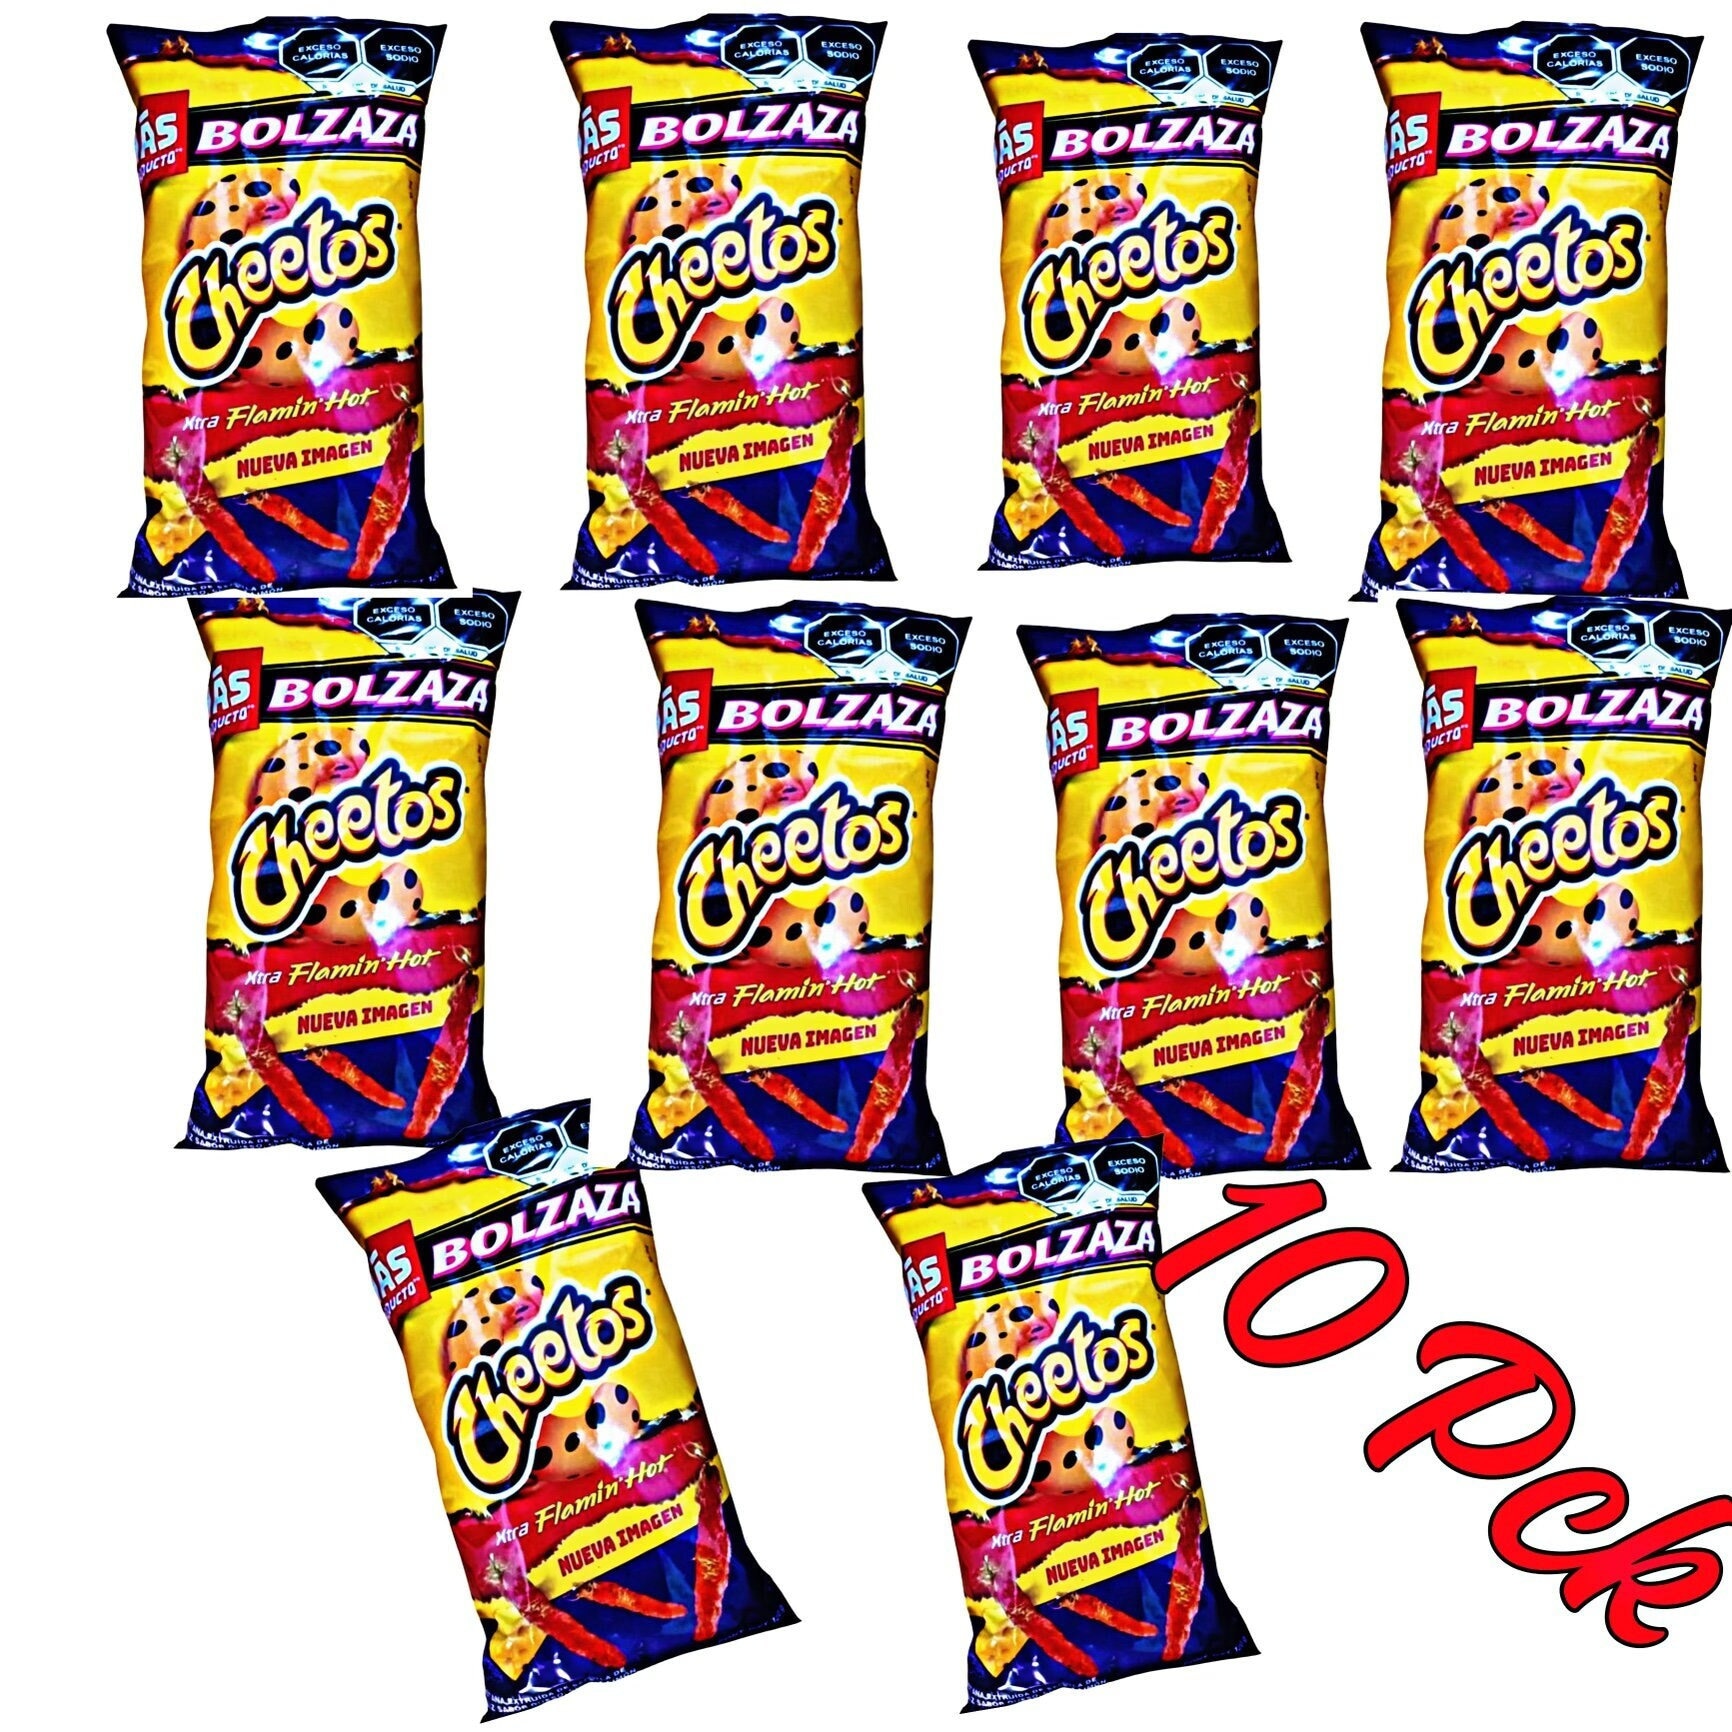 Cheetos® Crunchy Flamin' Hot Chips, 8.5 oz - Fry's Food Stores